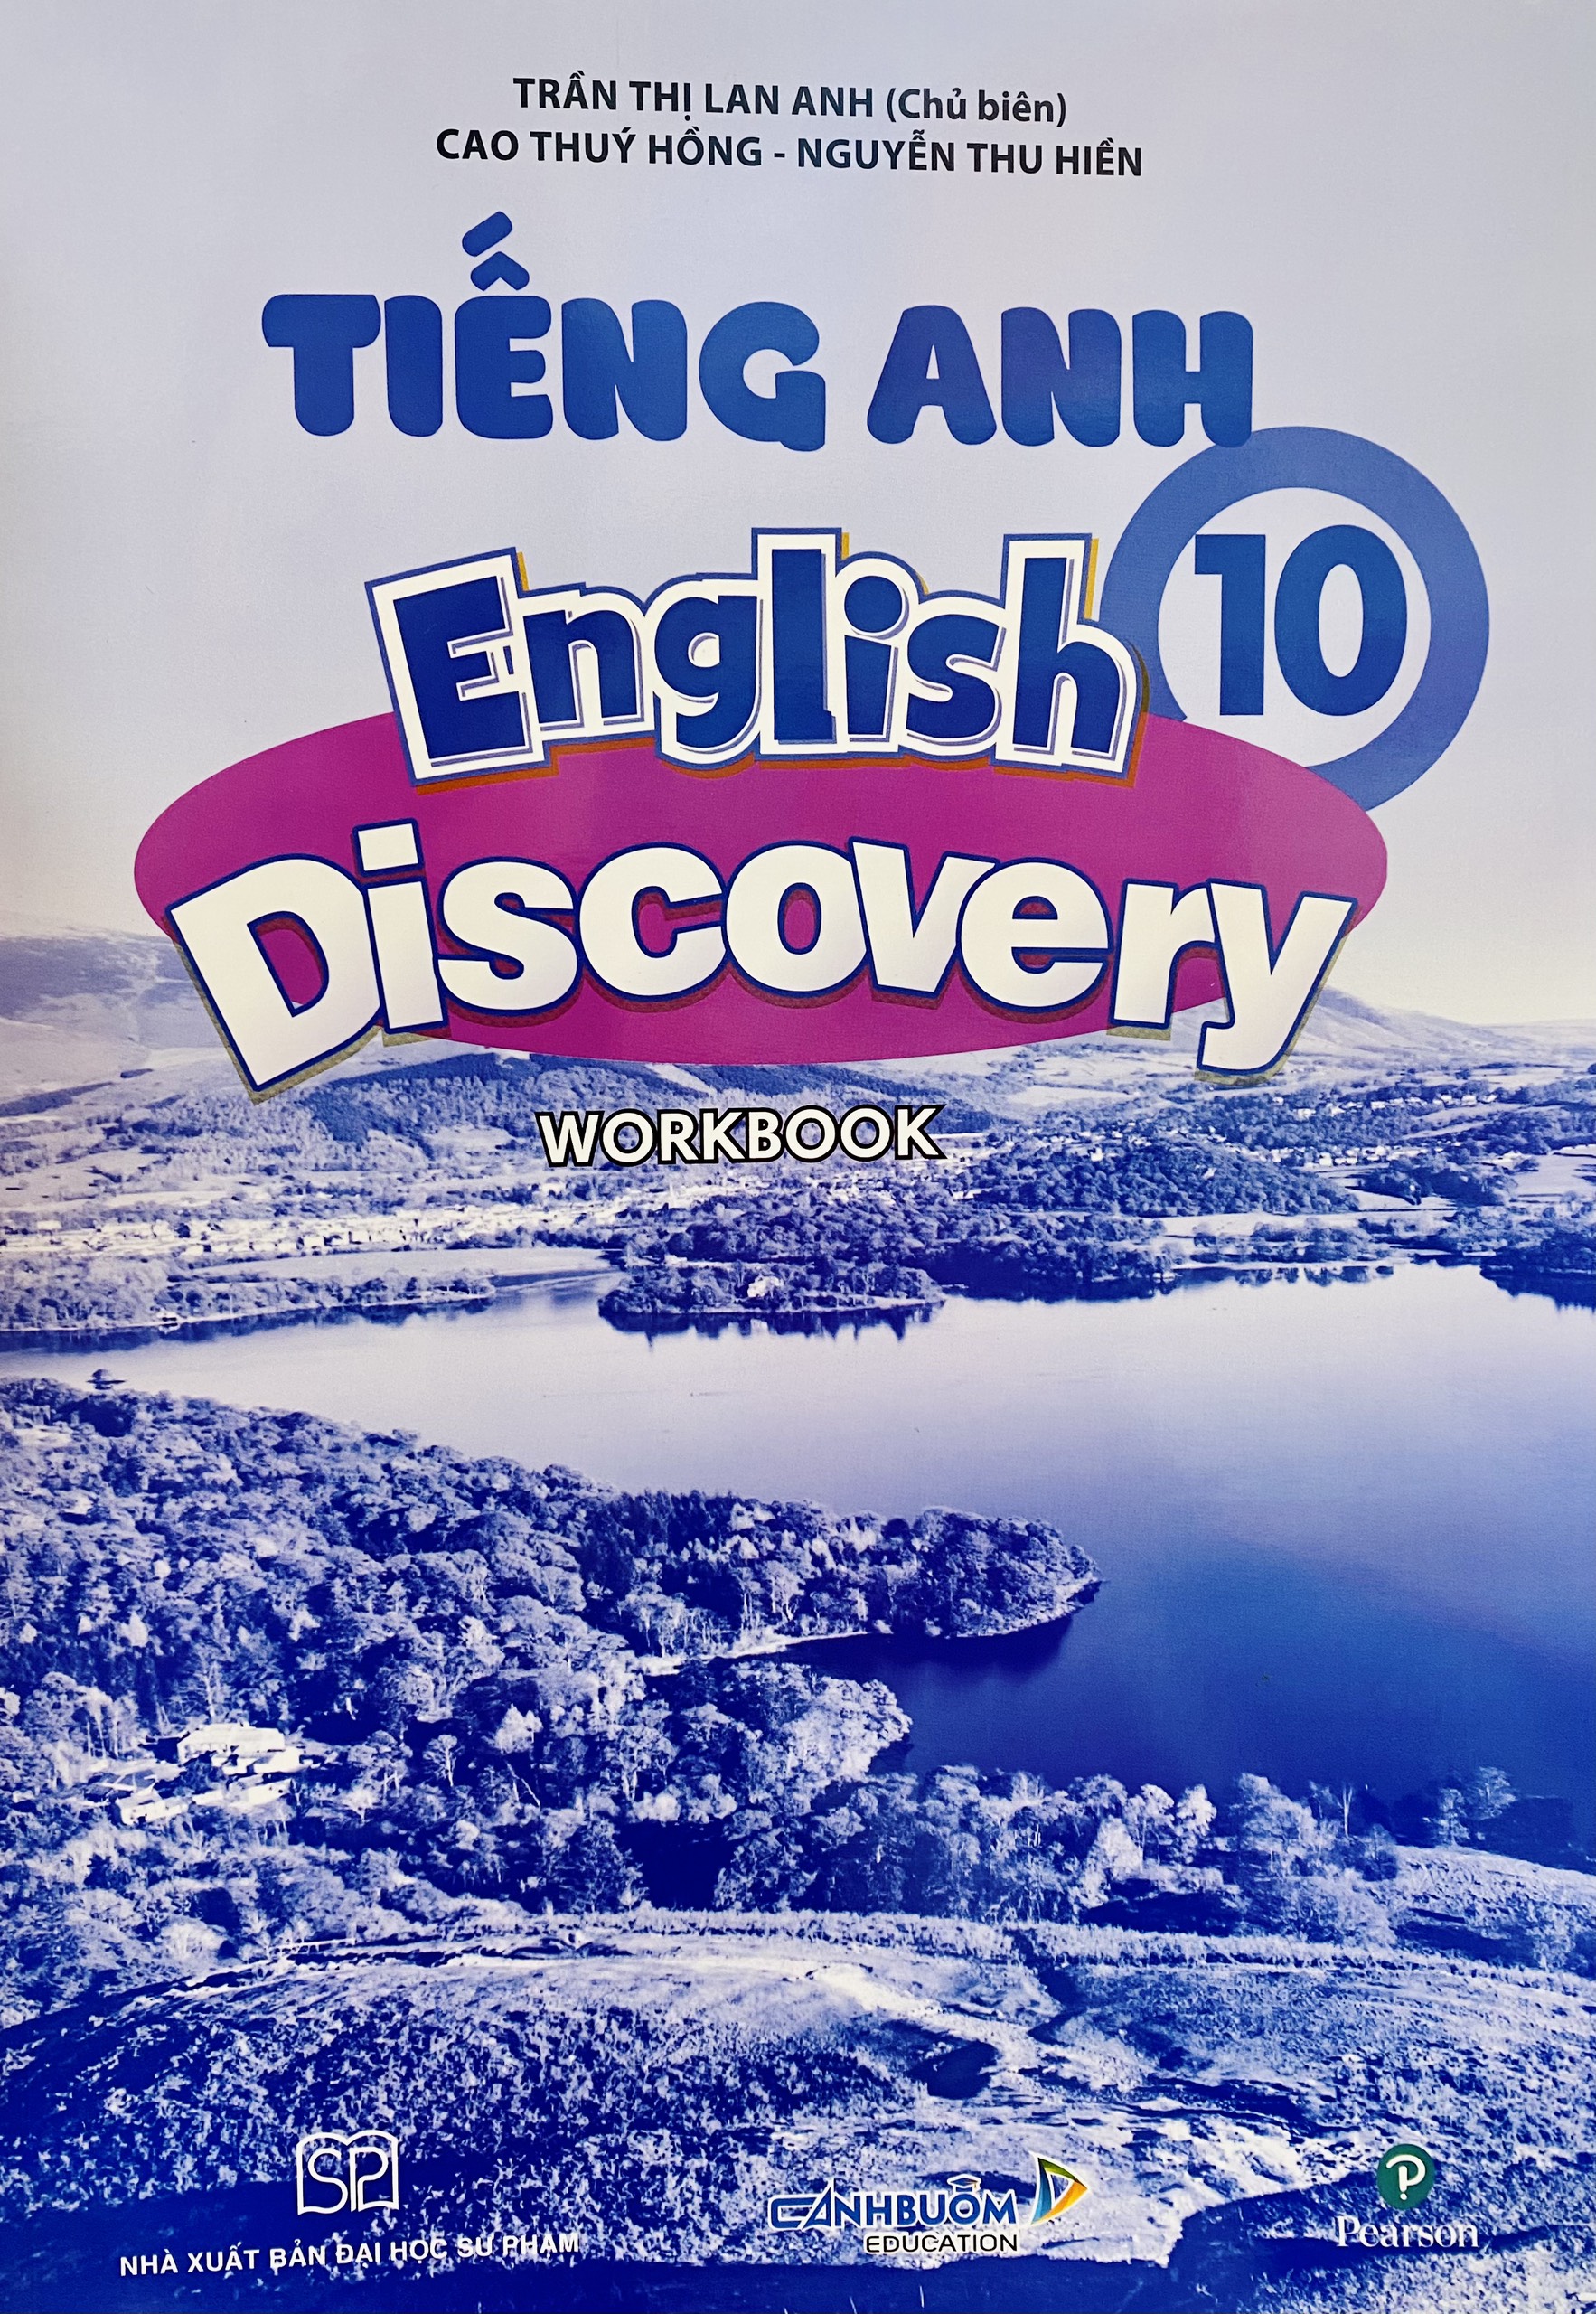 Tiếng Anh lớp 10 Discovery (Student's Book+Workbook)